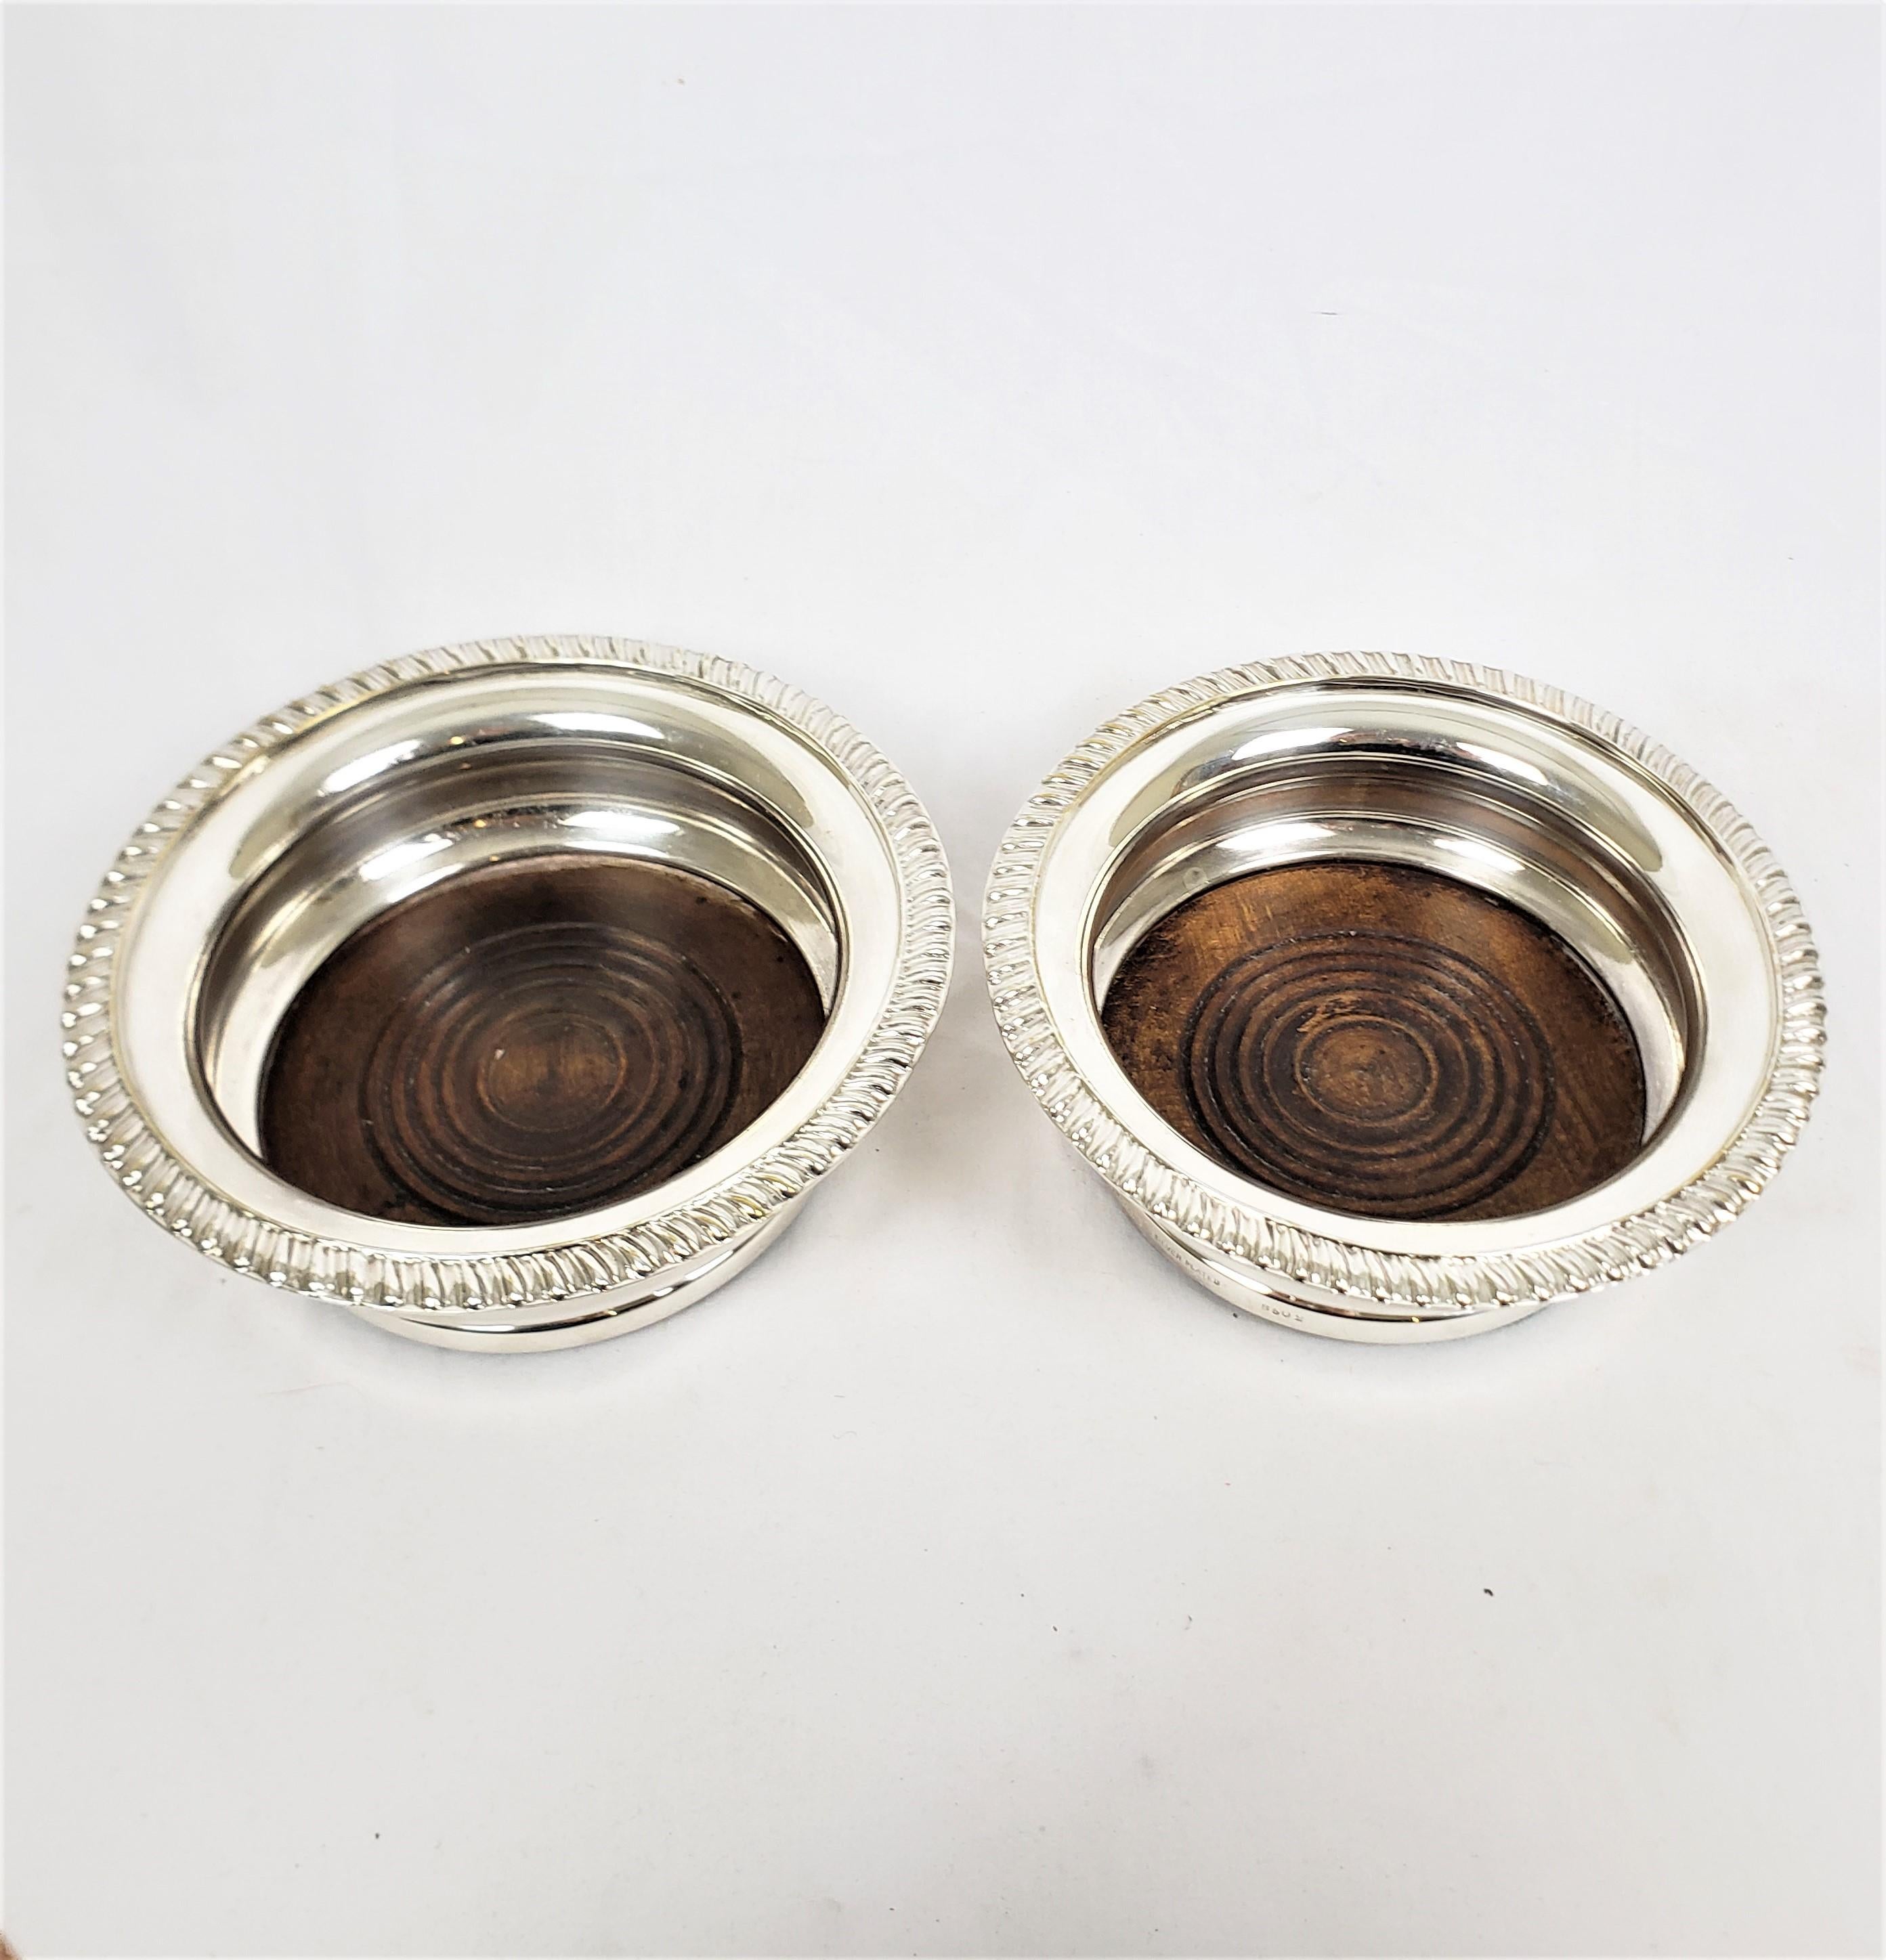 This pair of large wine bottle coasters are unsigned with respect to the maker, but originate from England and date to approximately 1920and done in a period Art Deco style. The bottle coasters are composed of silver plate with deep ribbed sides and